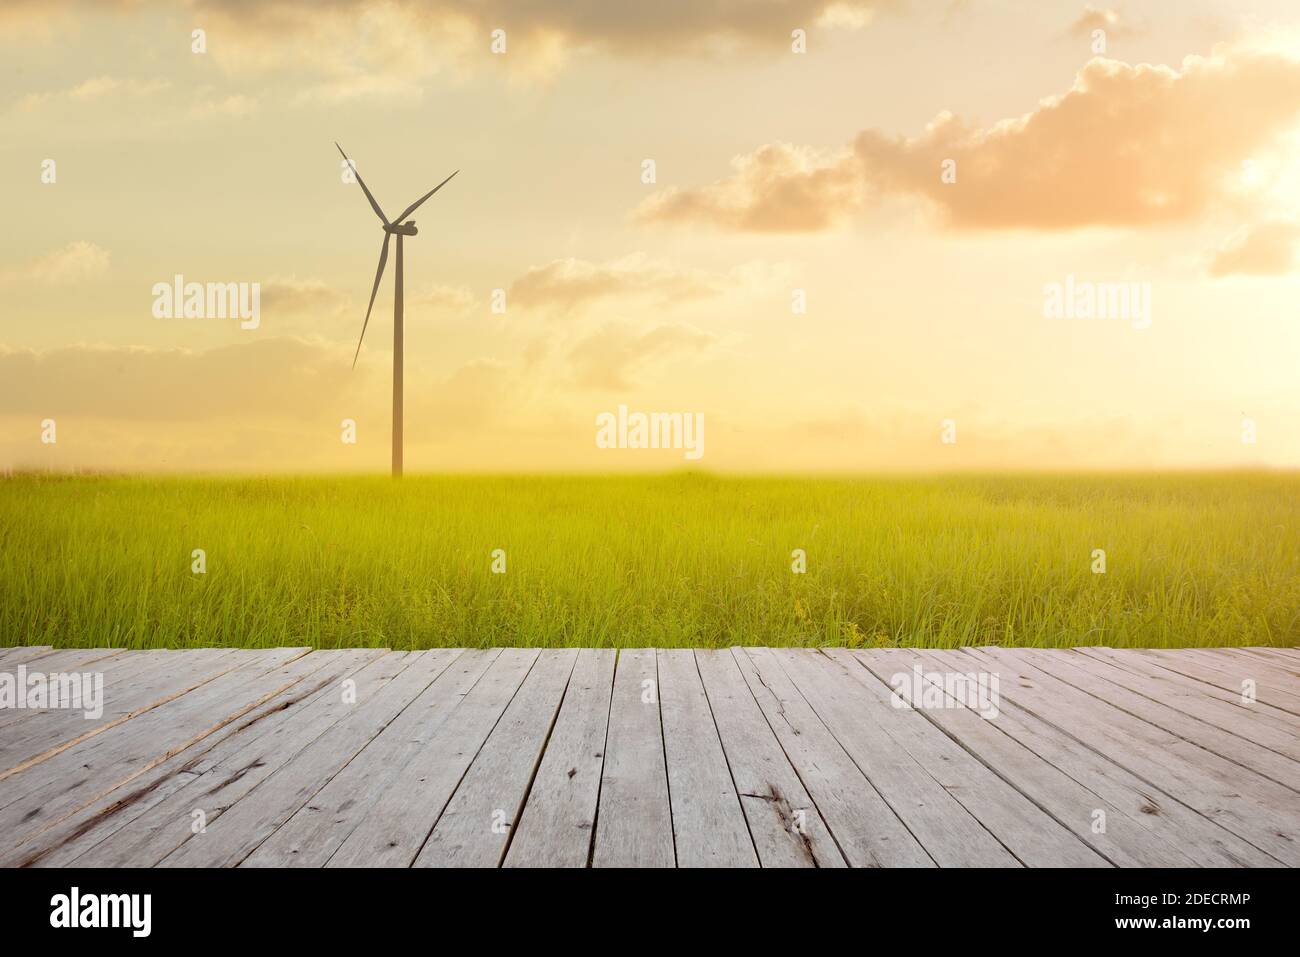 Wind turbine on green rice field against sunset background with plank wood foreground. Green energy concept. Stock Photo